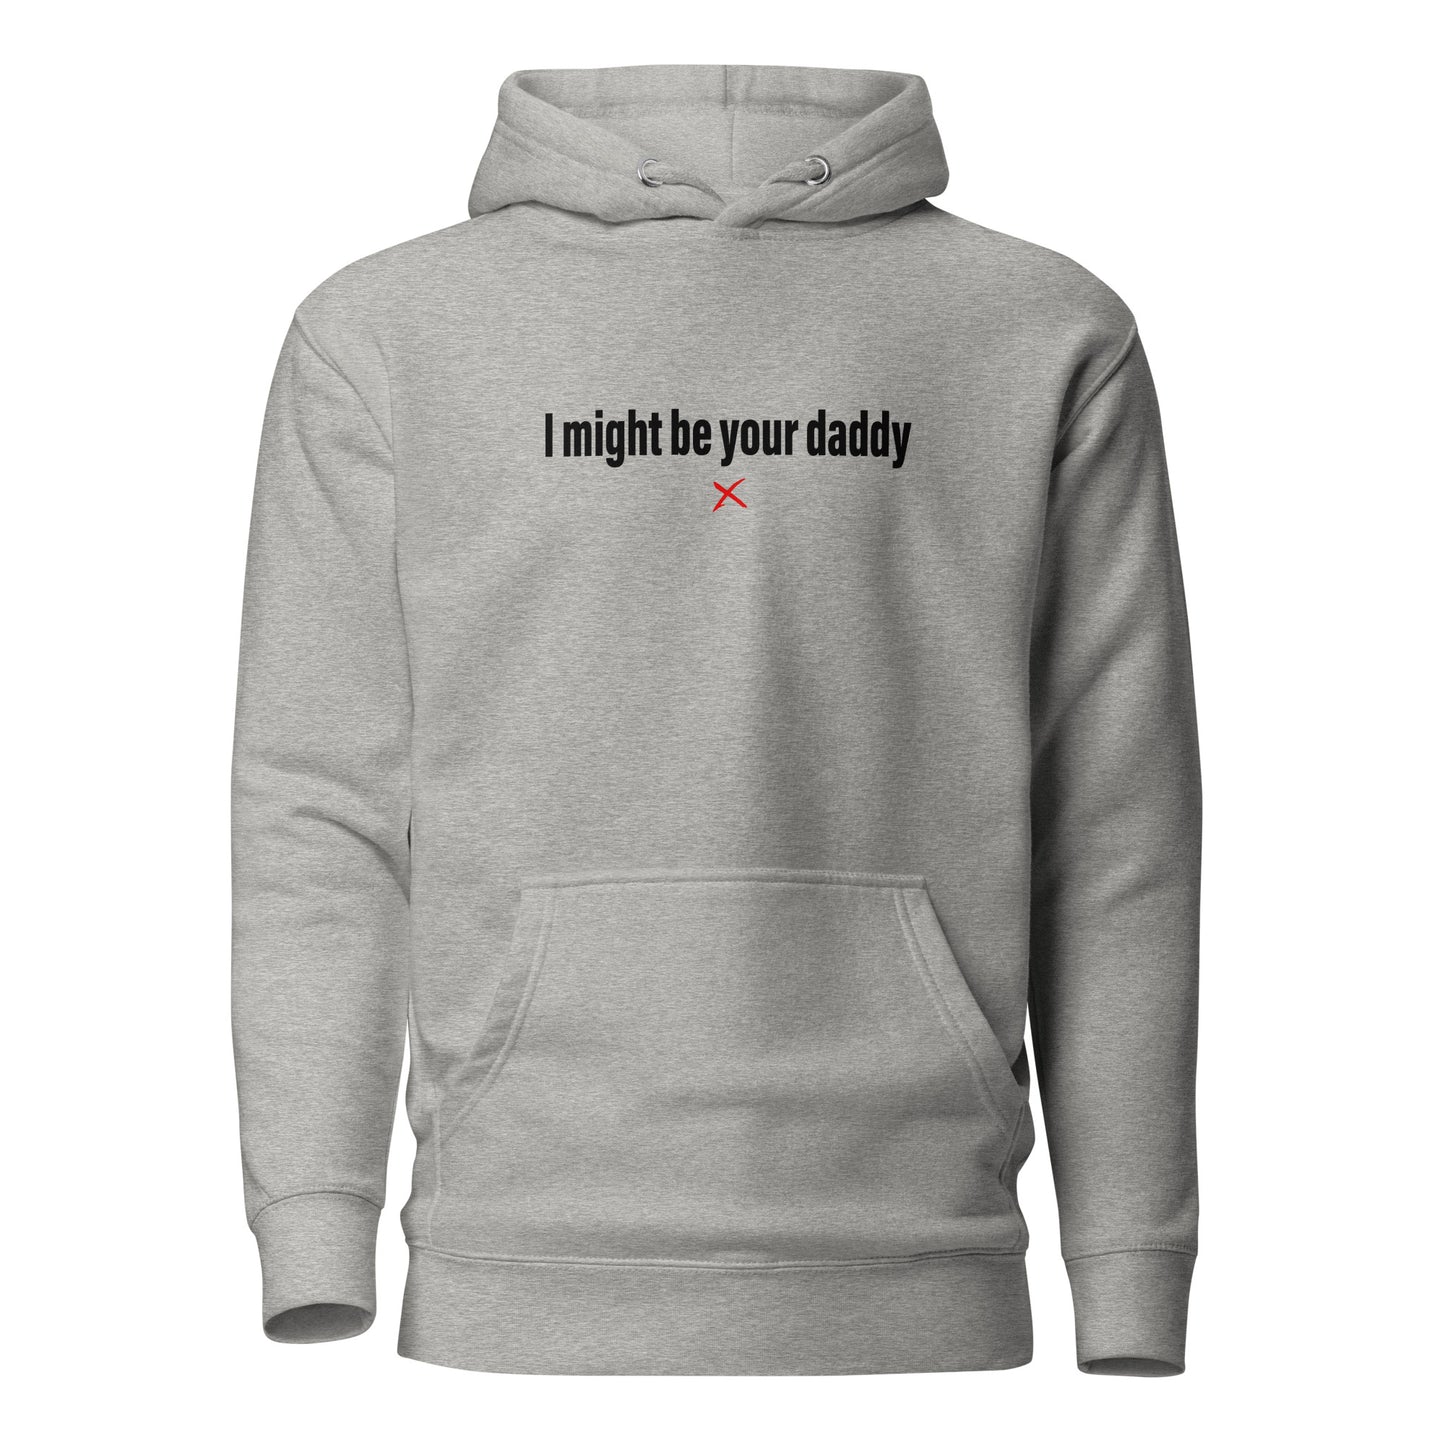 I might be your daddy - Hoodie